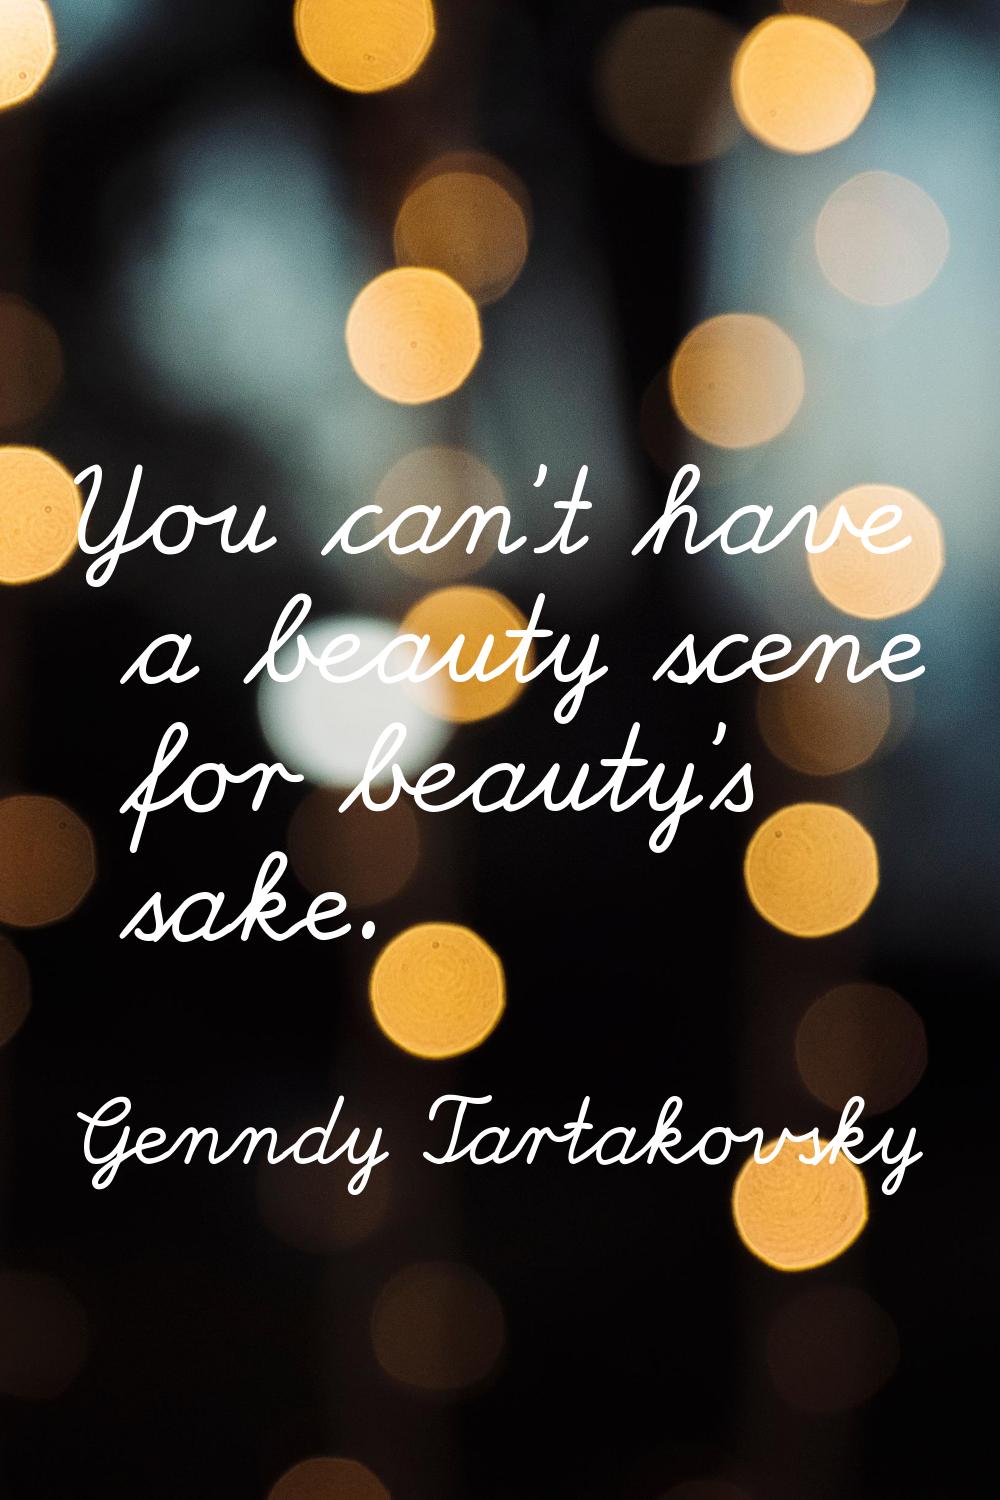 You can't have a beauty scene for beauty's sake.